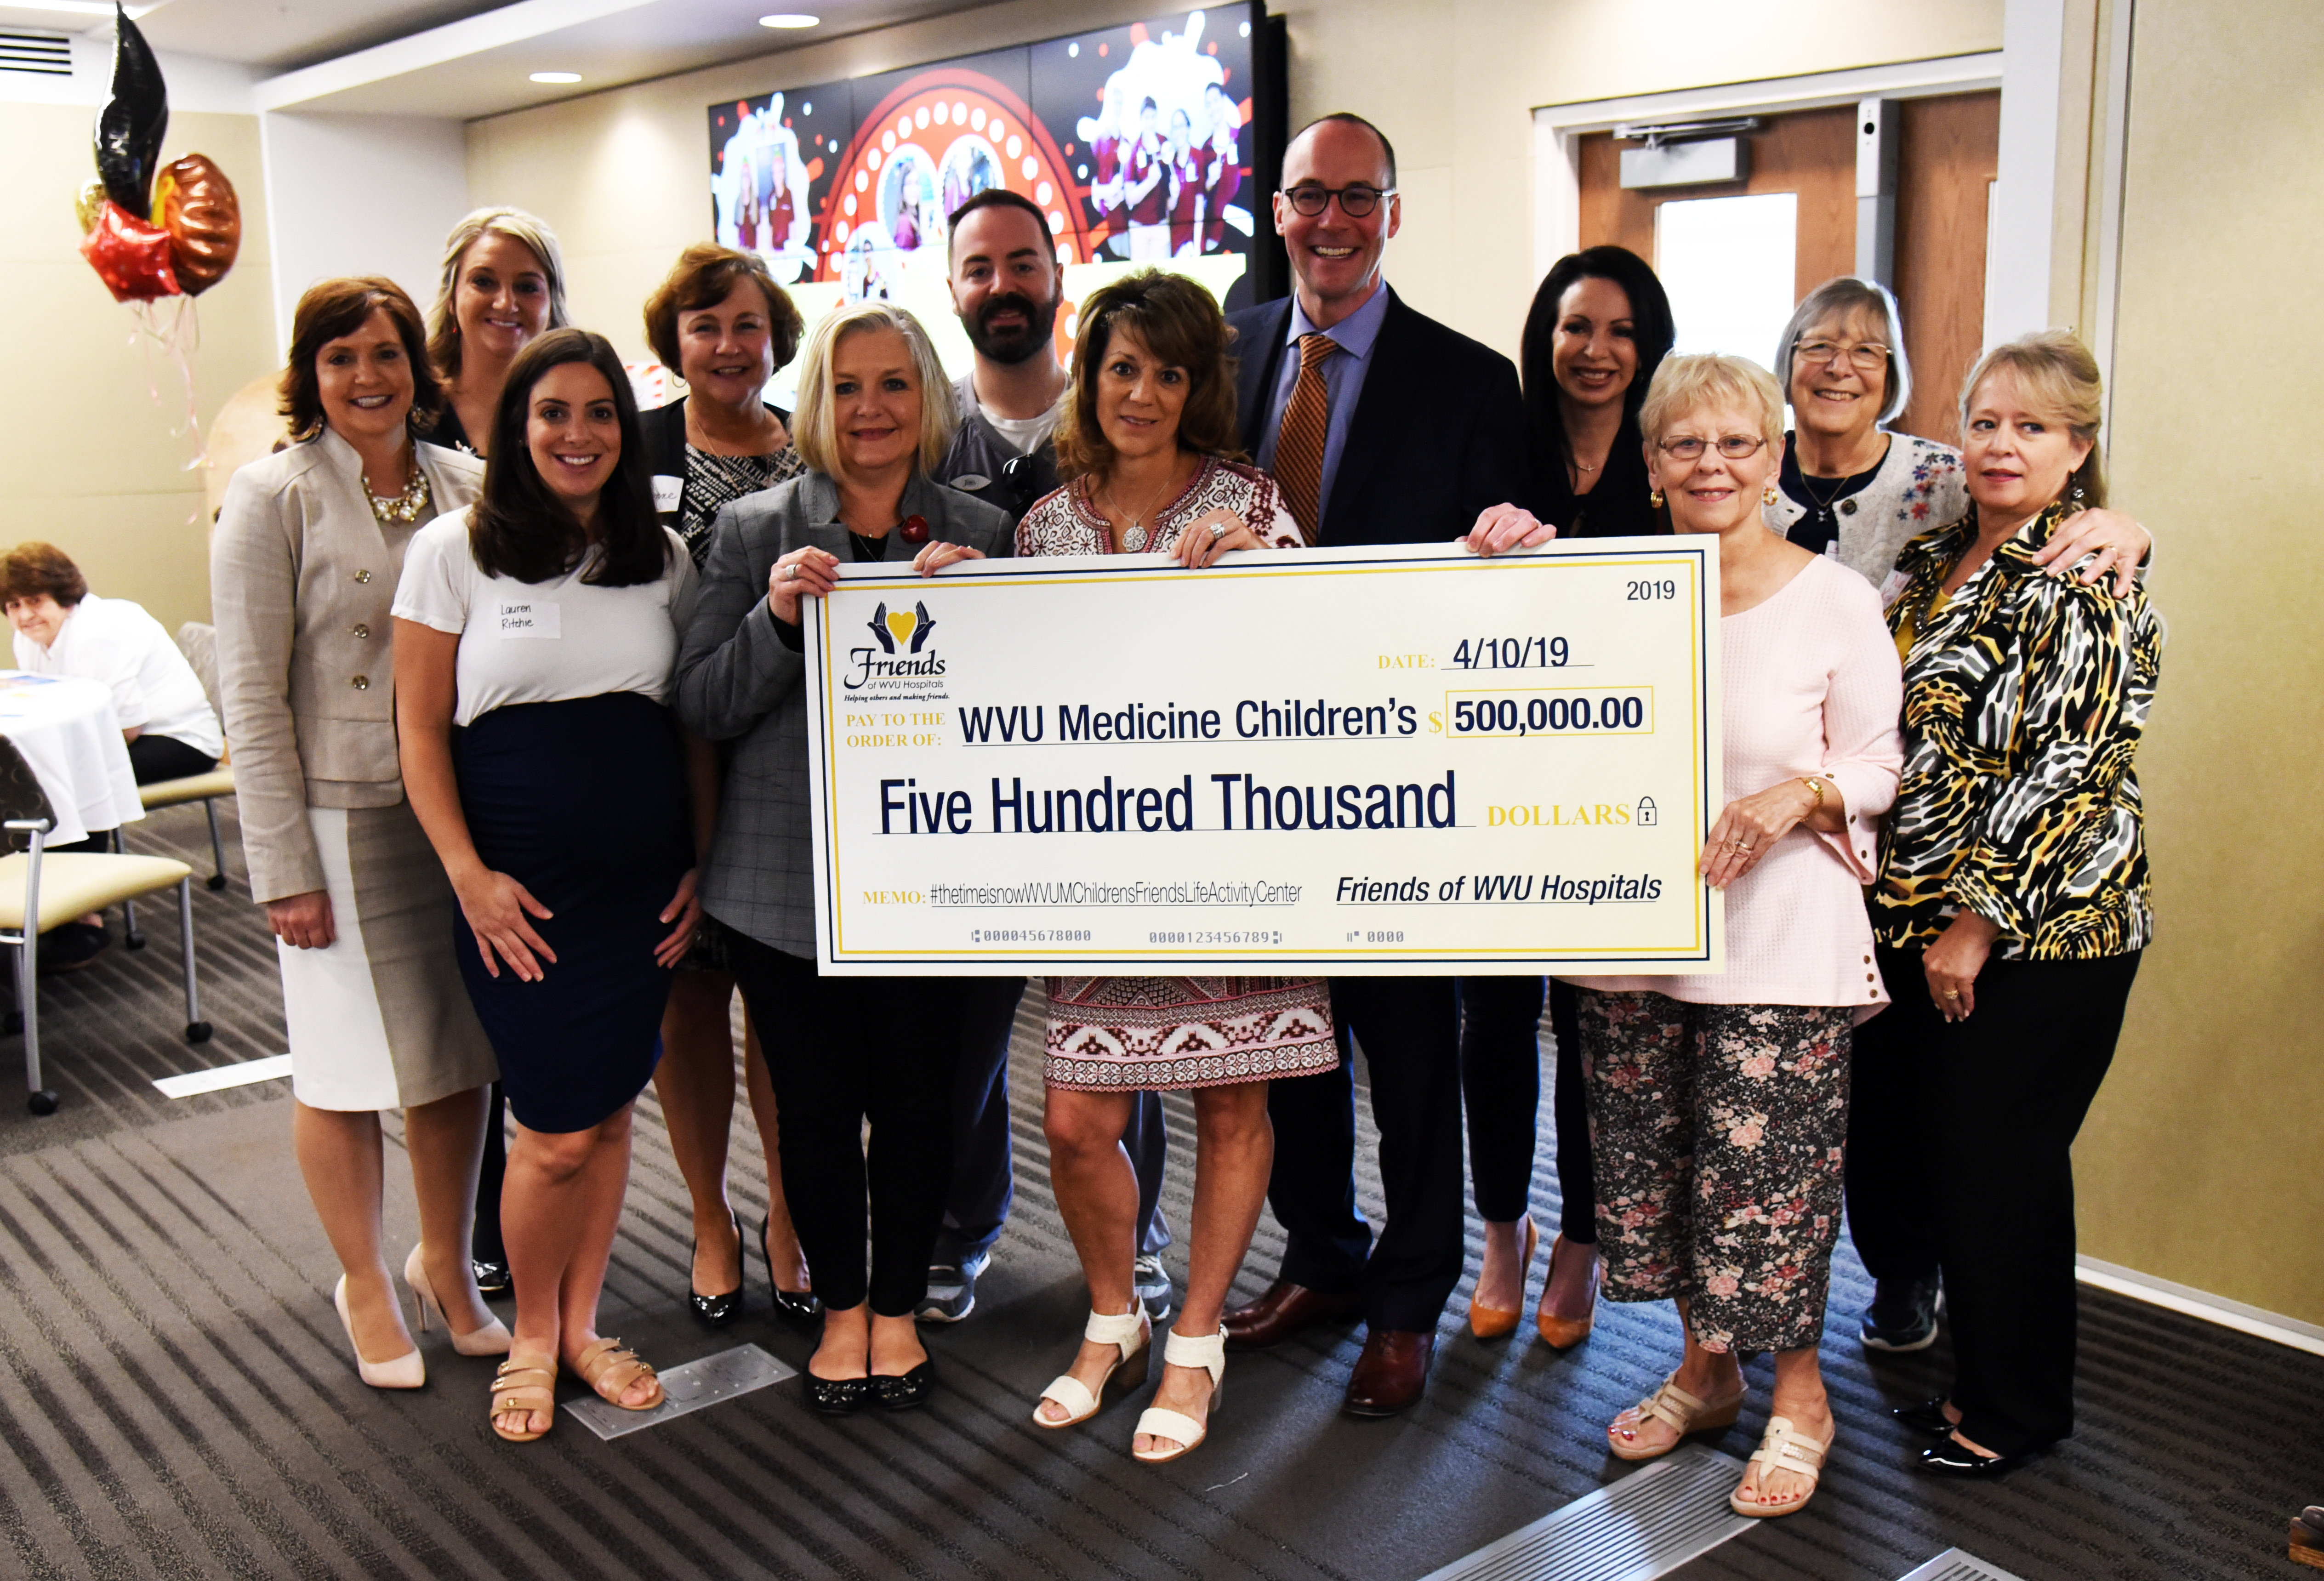 The Friends of WVU Hospitals Board of Directors presents a check for $500,000 to the WVU Medicine Children's "Grow Children's" Capital Campaign.